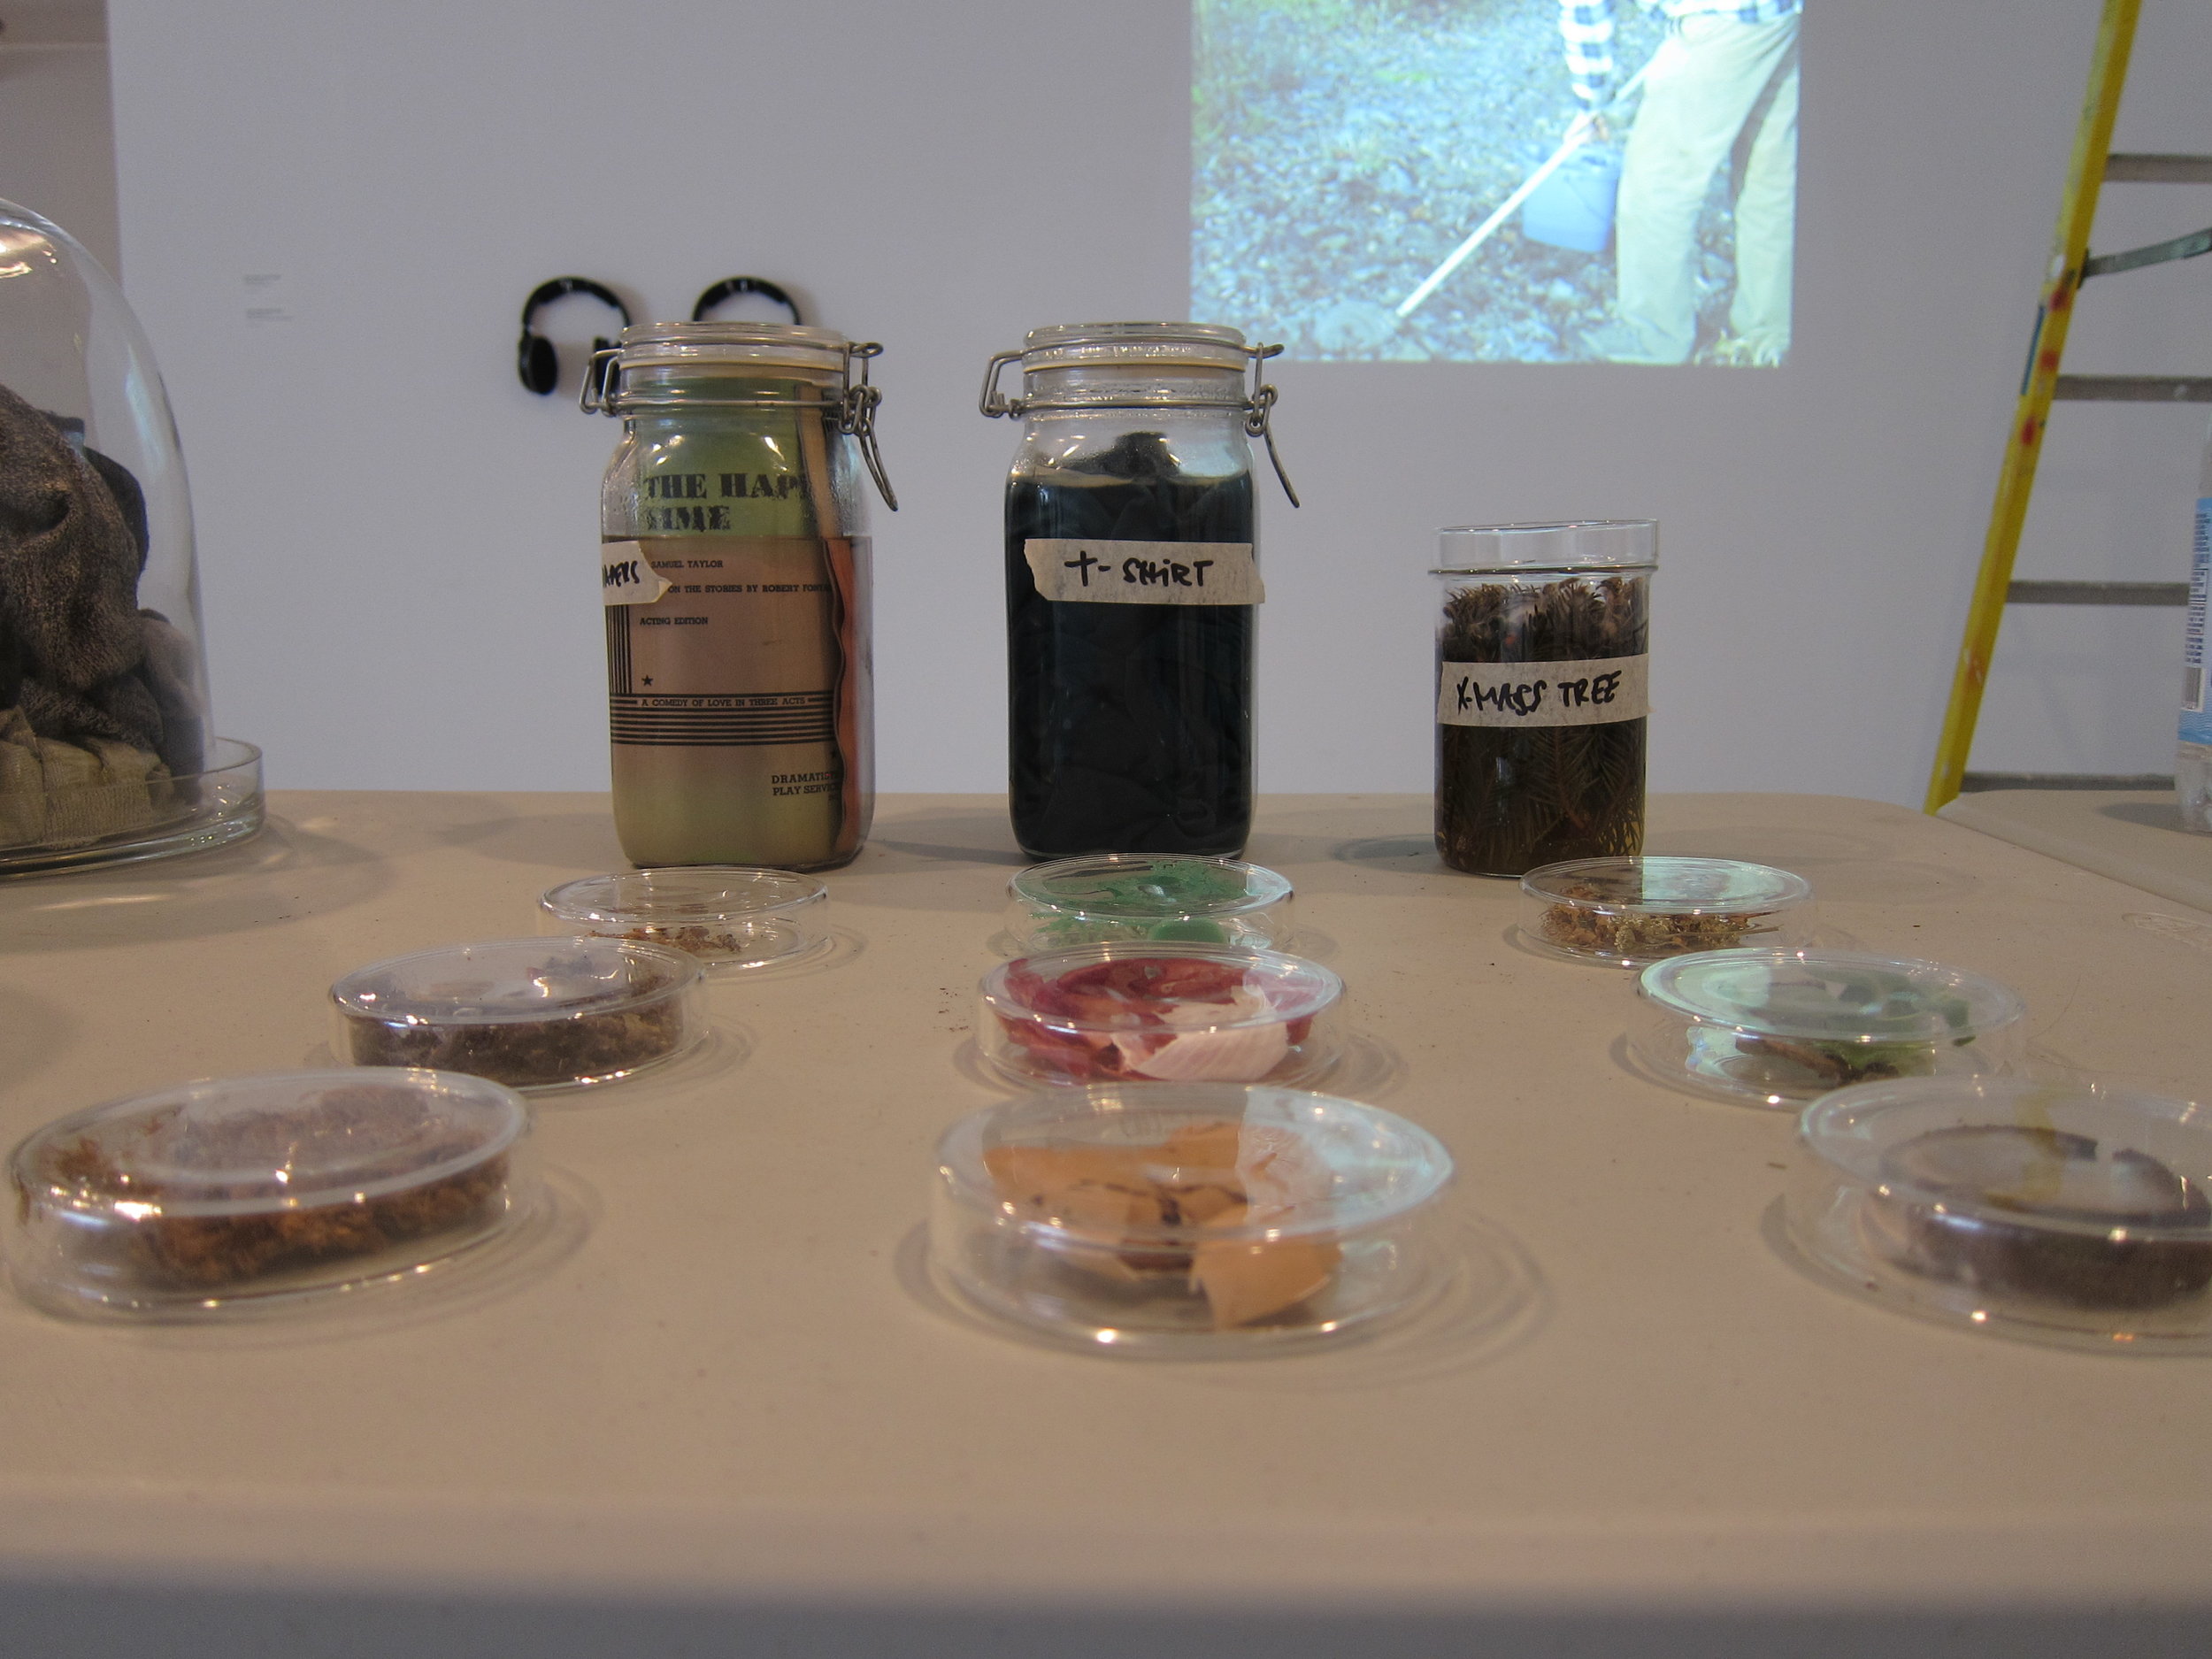   Kristyna Milde and Marek Milde,   Cabinet of Smells,  2014-15. Installation of perfume bottles and cleaning supplies and distillation station. Dimensions variable. 